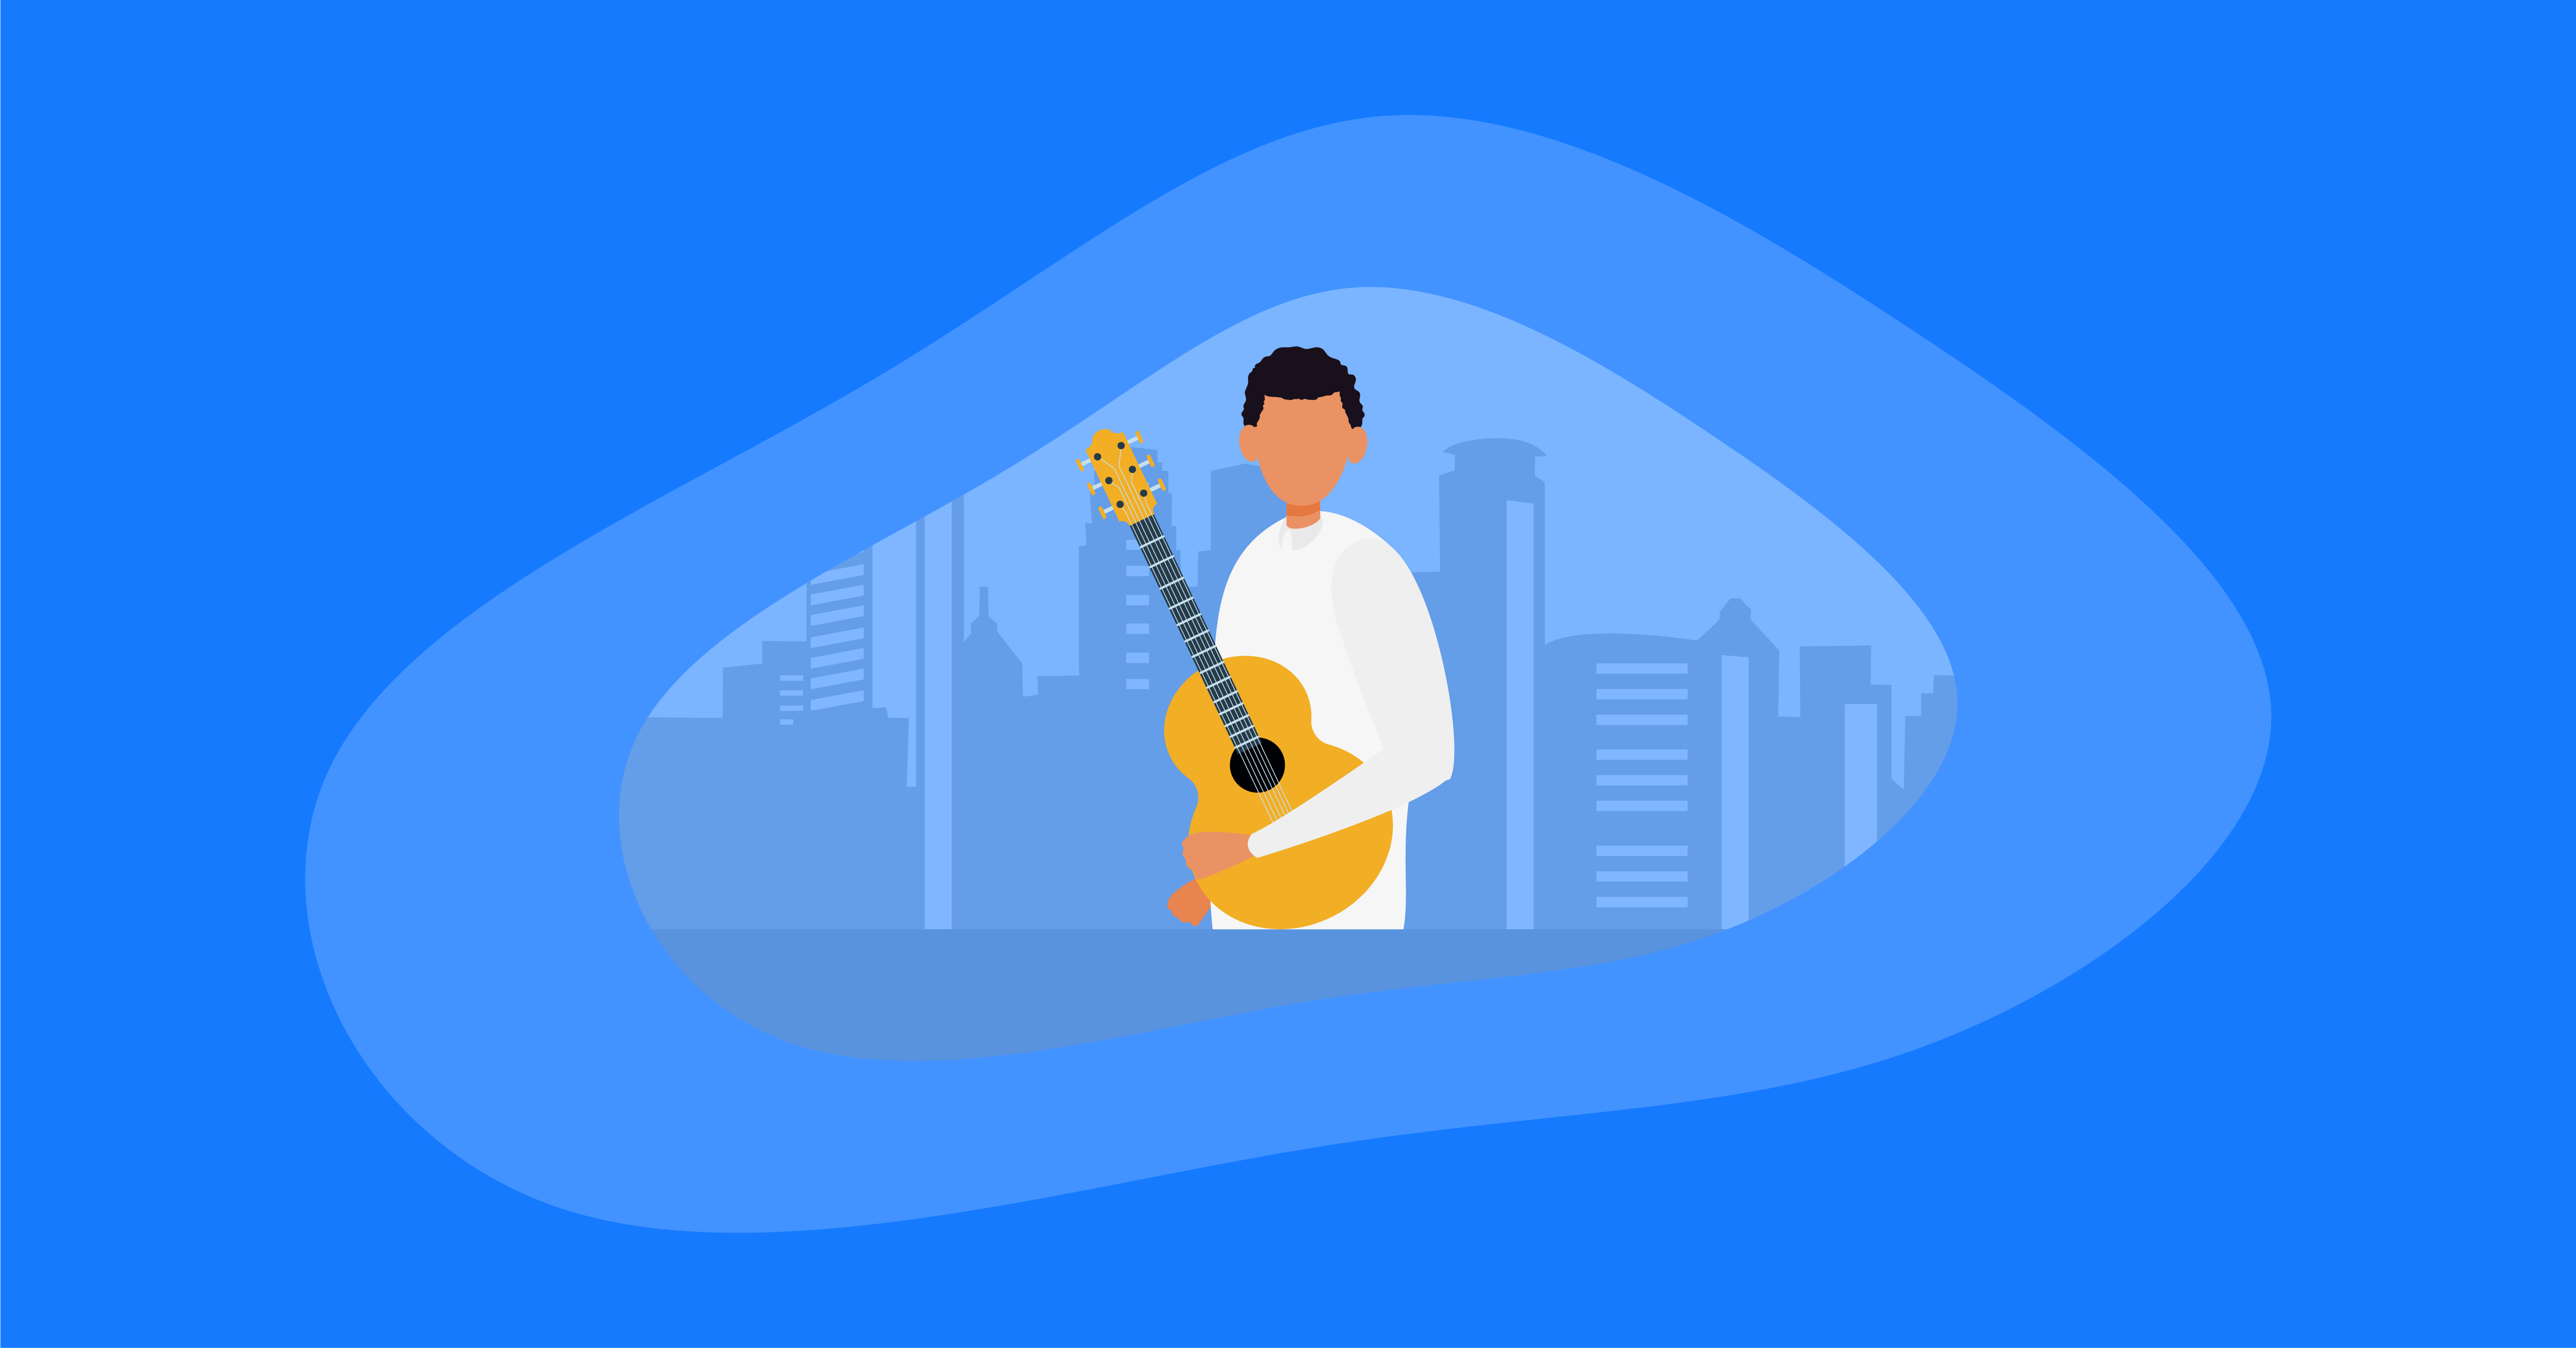 Illustration of a musician holding a guitar